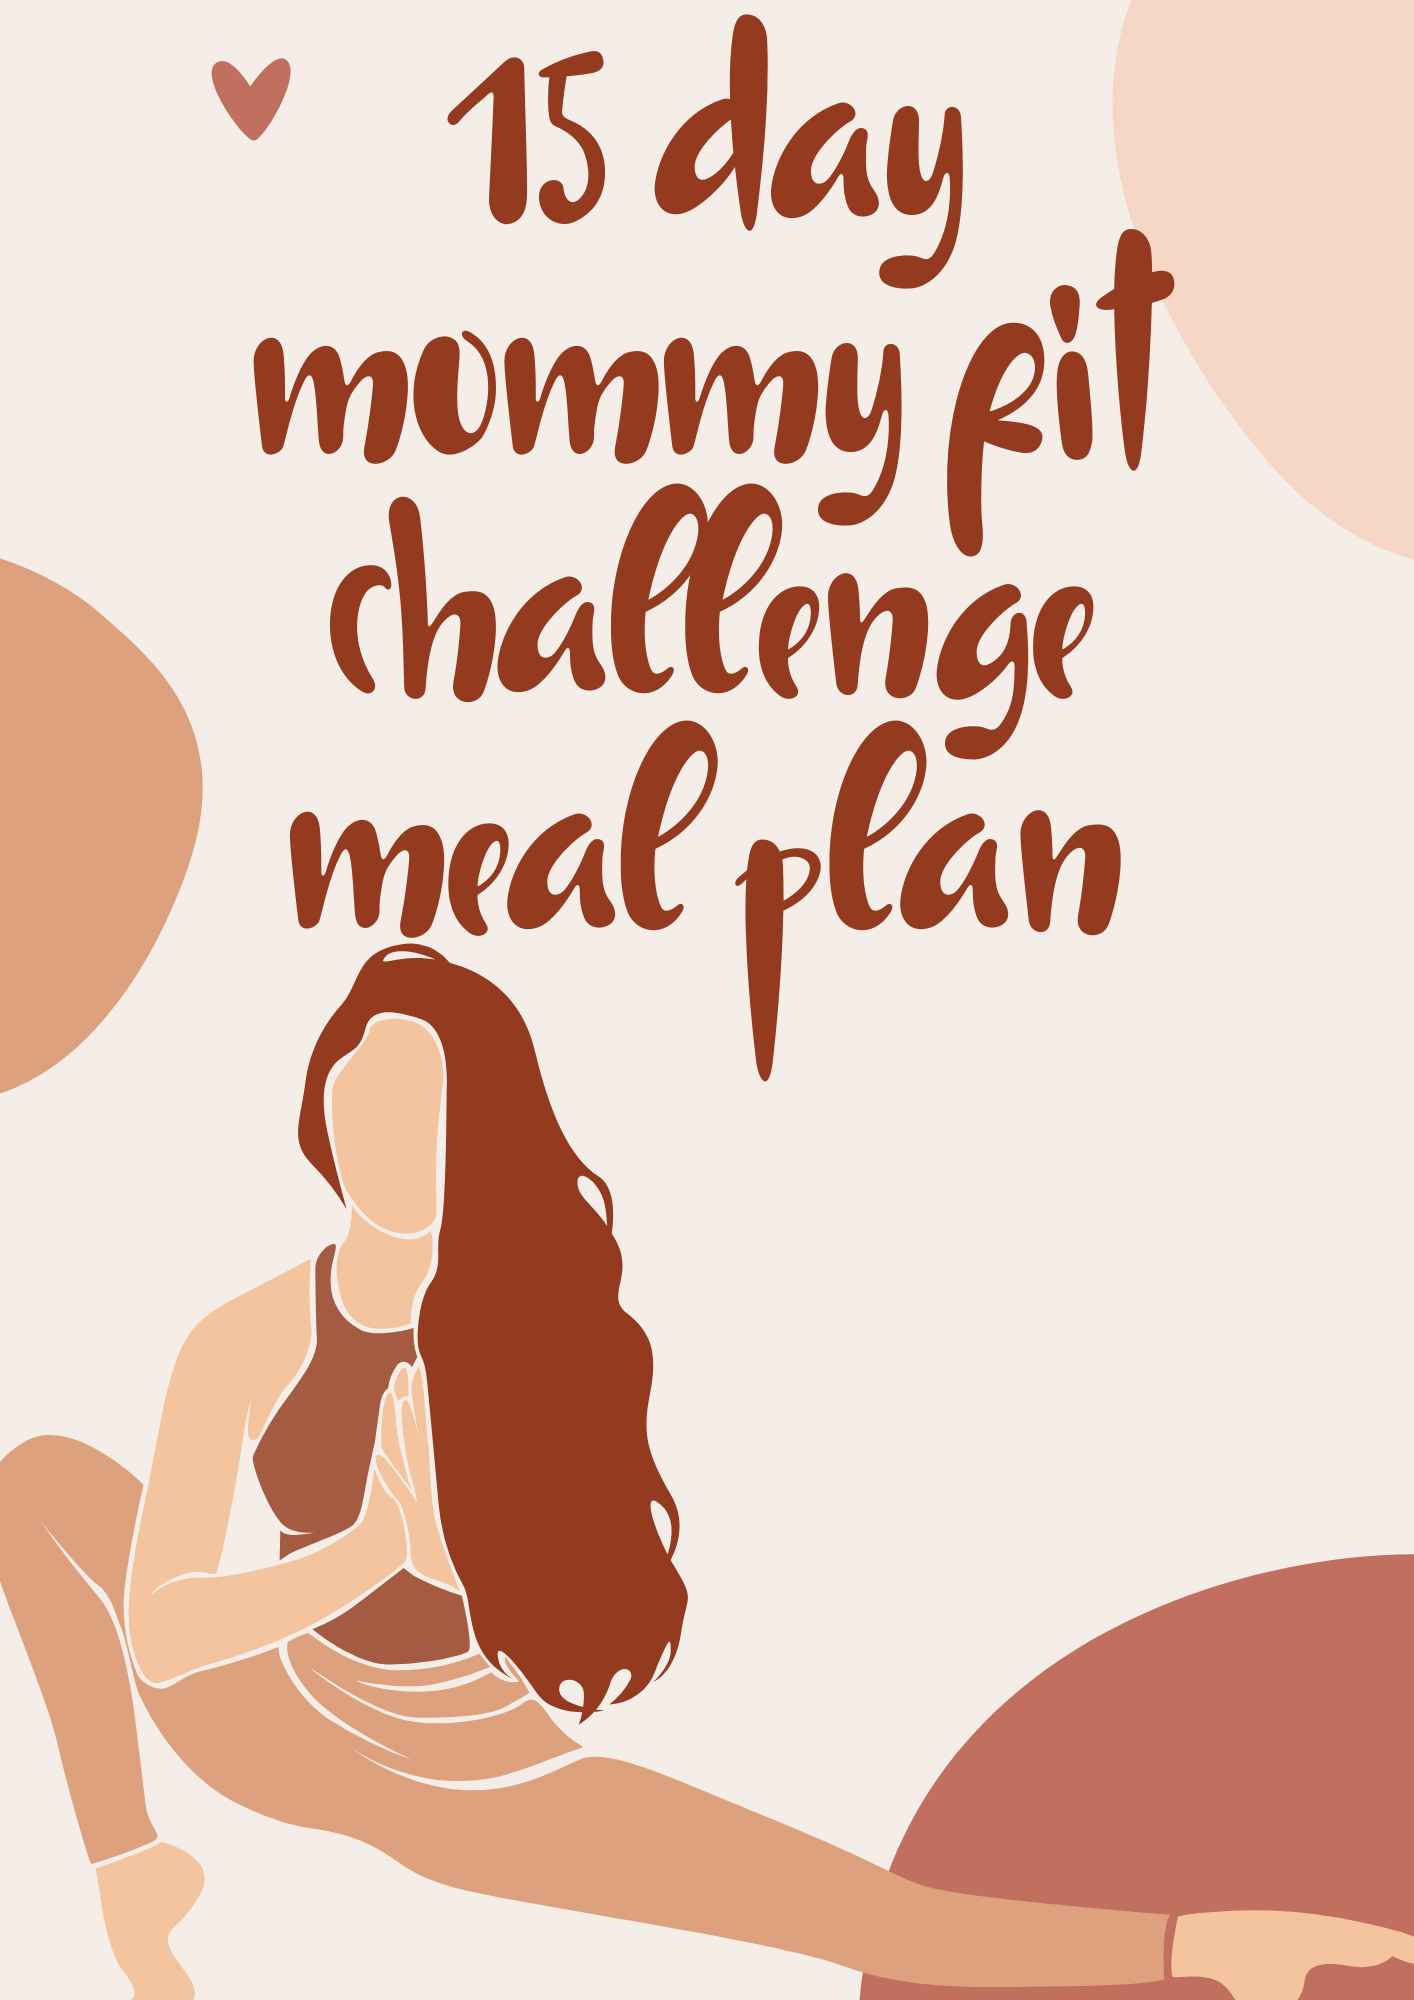 15 day mommy fit challenge meal plan